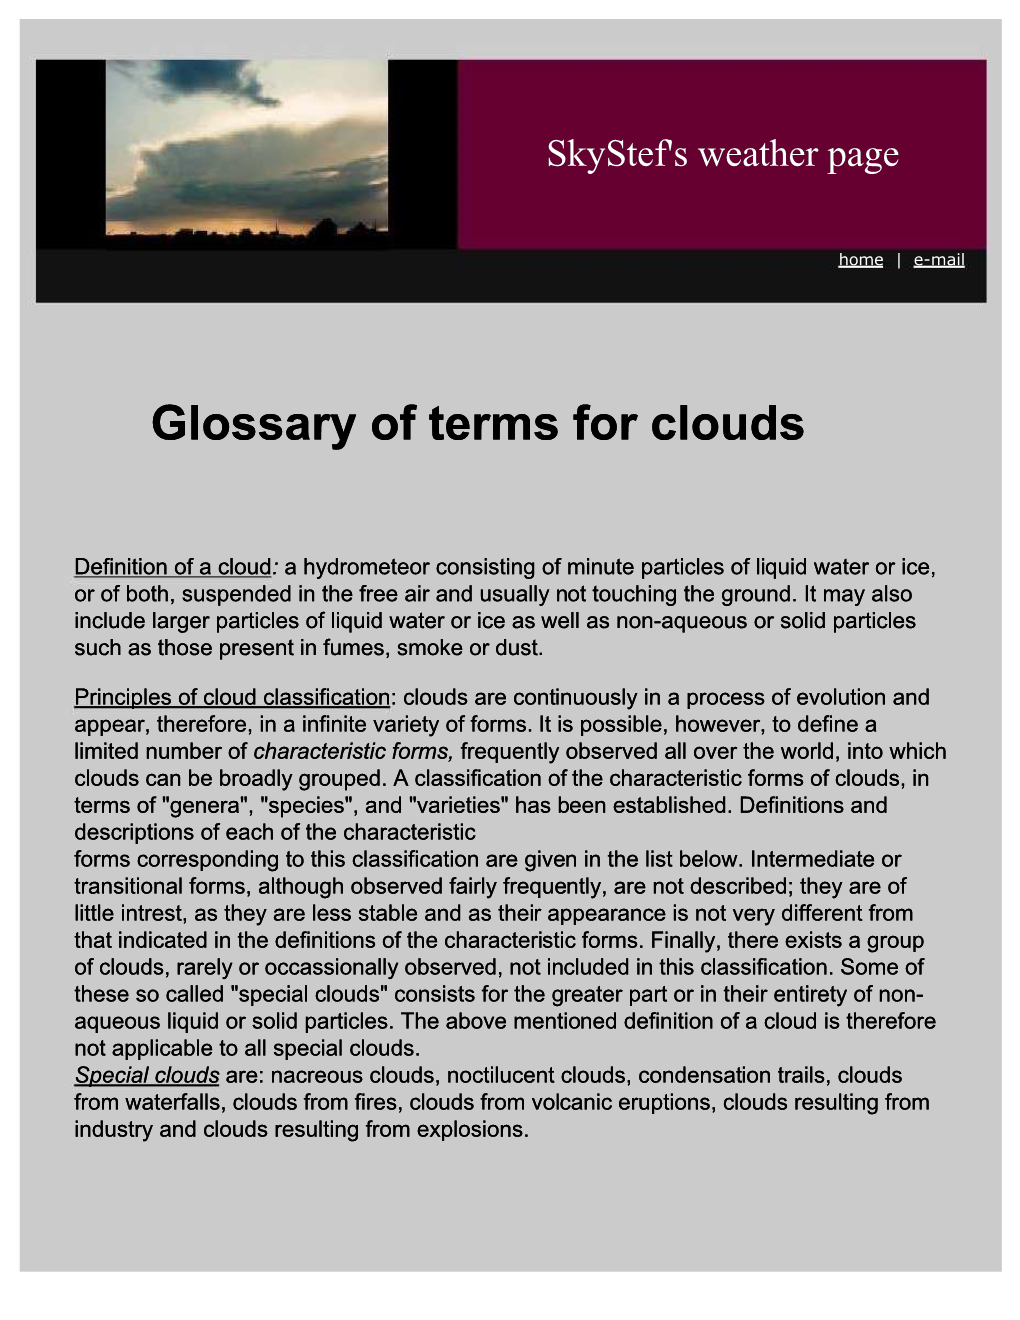 Glossary of Terms for Clouds